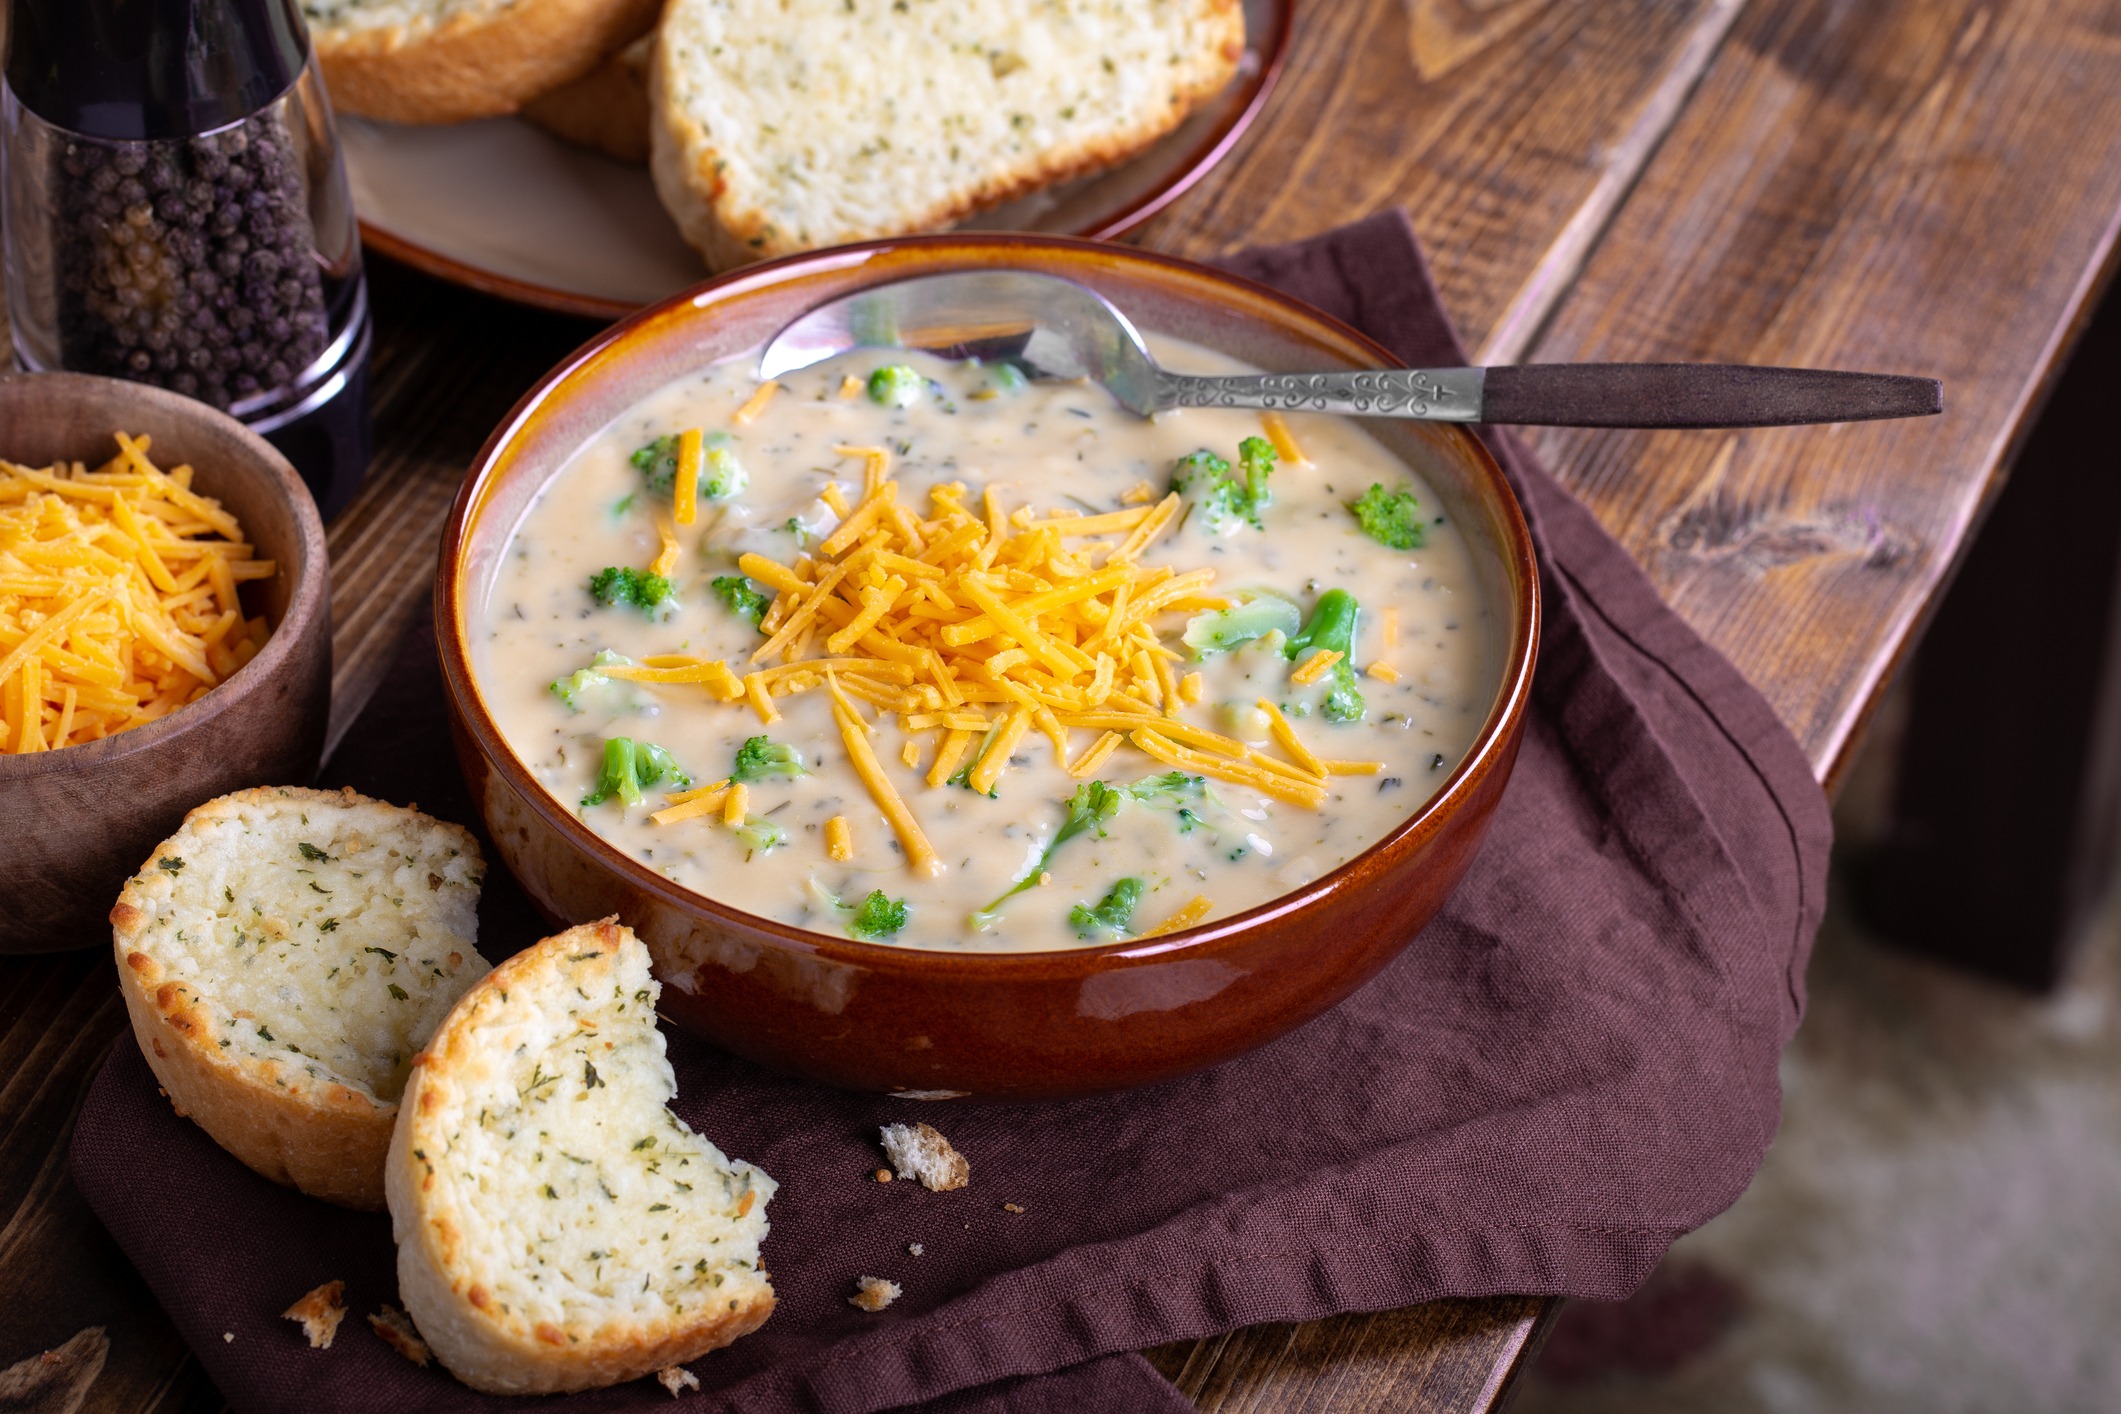 Bowl of creamy broccoli cheddar cheese soup with toasted cheese bread on a wooden table